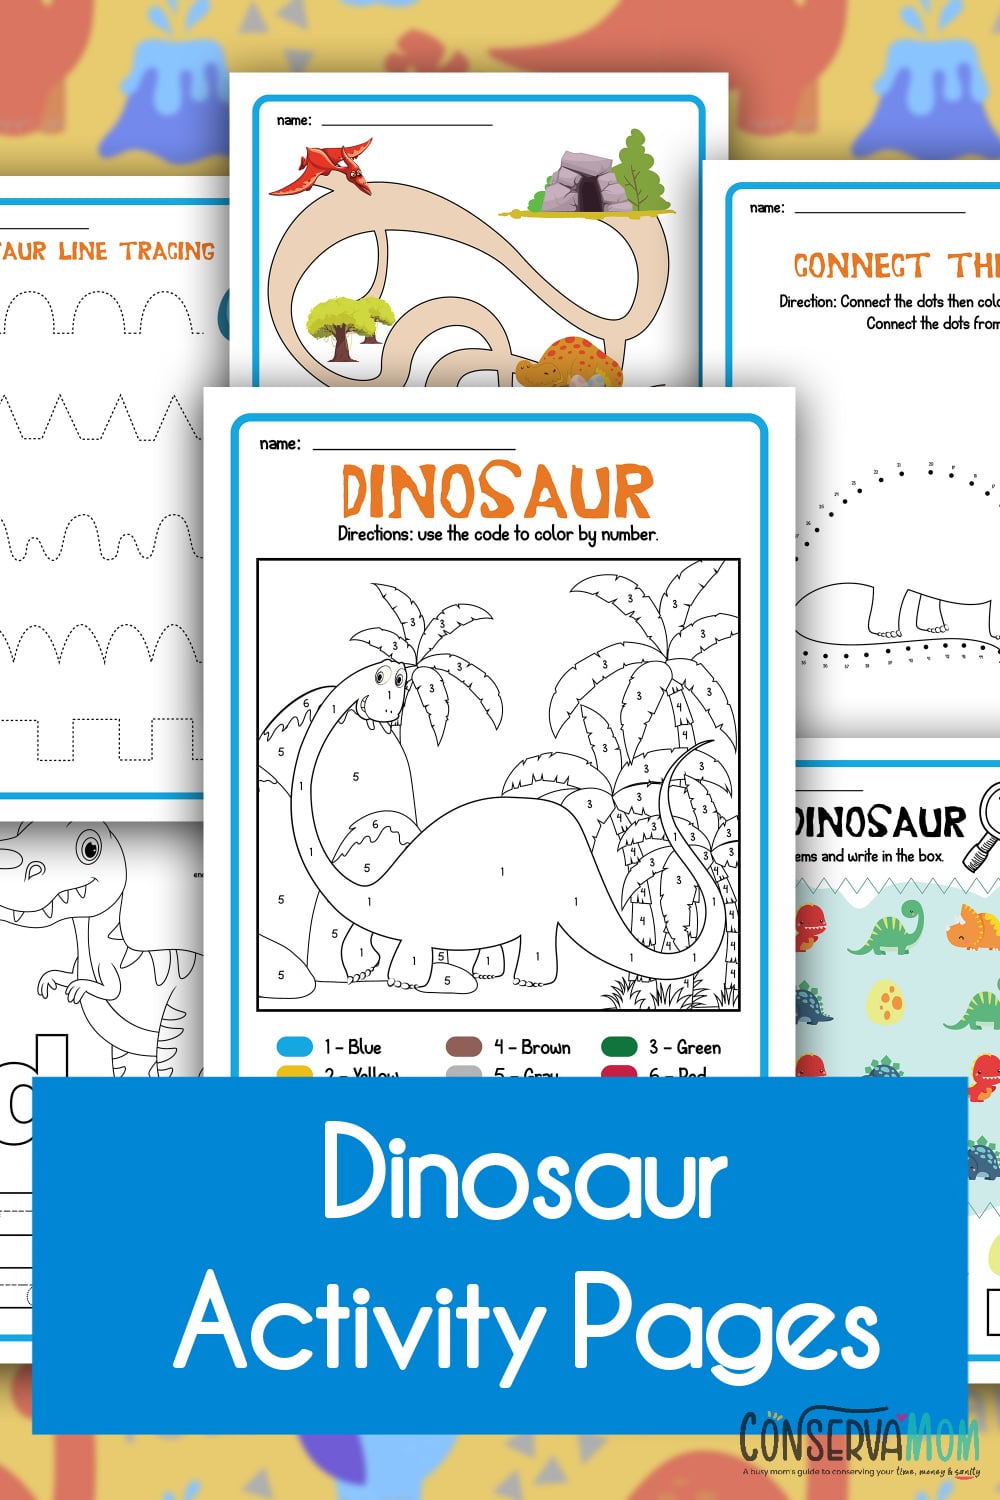 Dinosaur Activity Pages